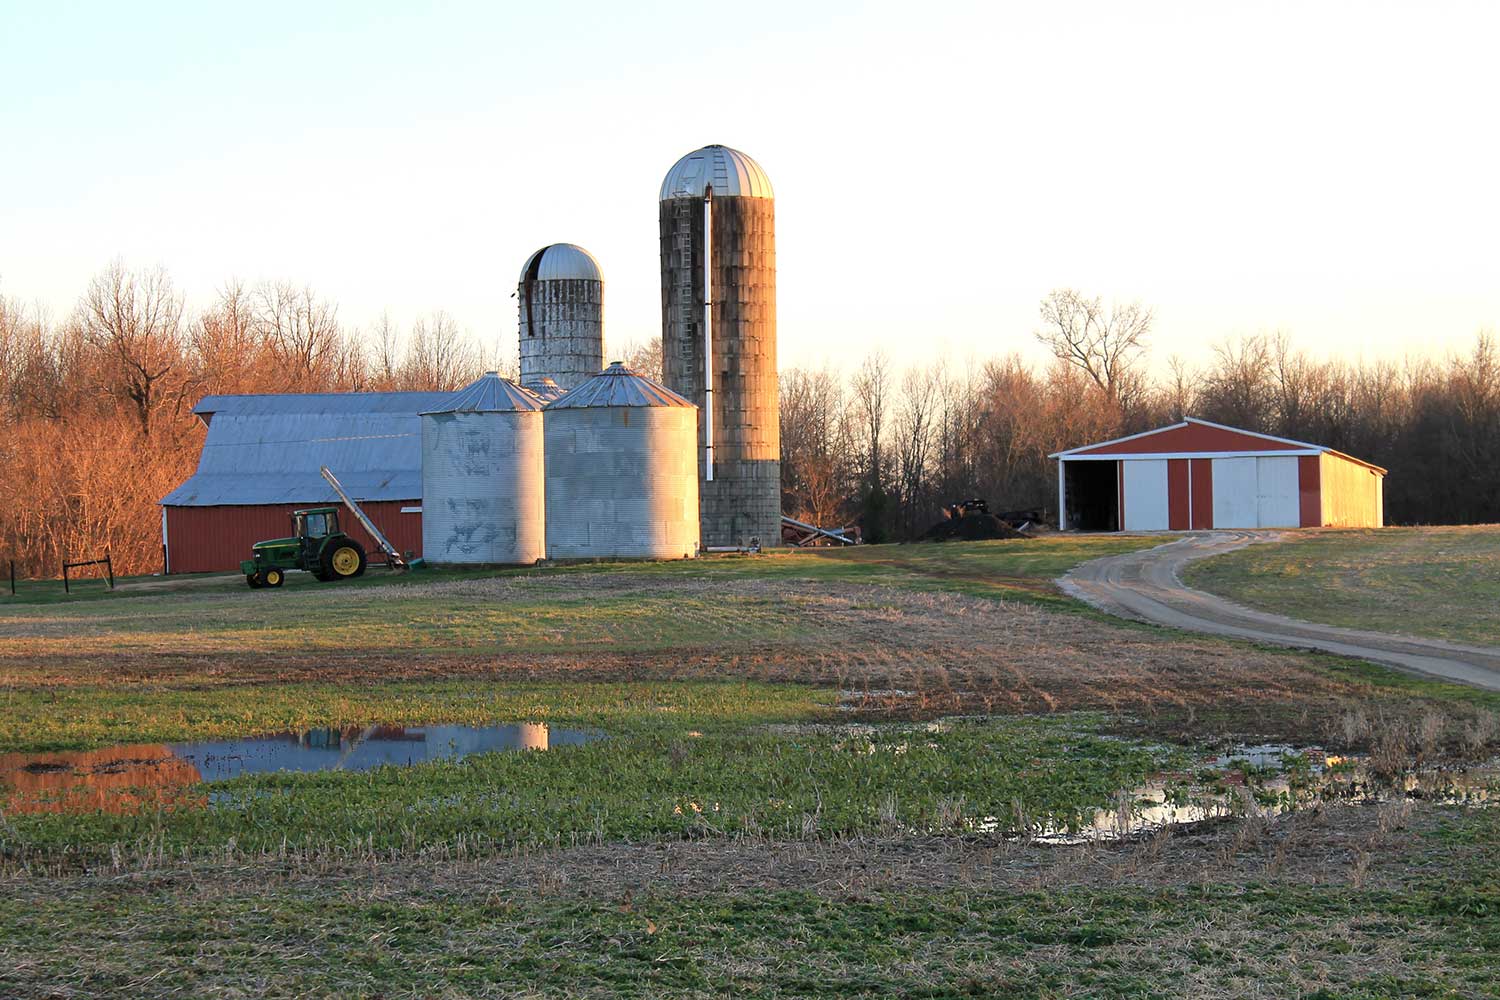 A landscape photograph showing a barn, grain silos and a tractor in a field.